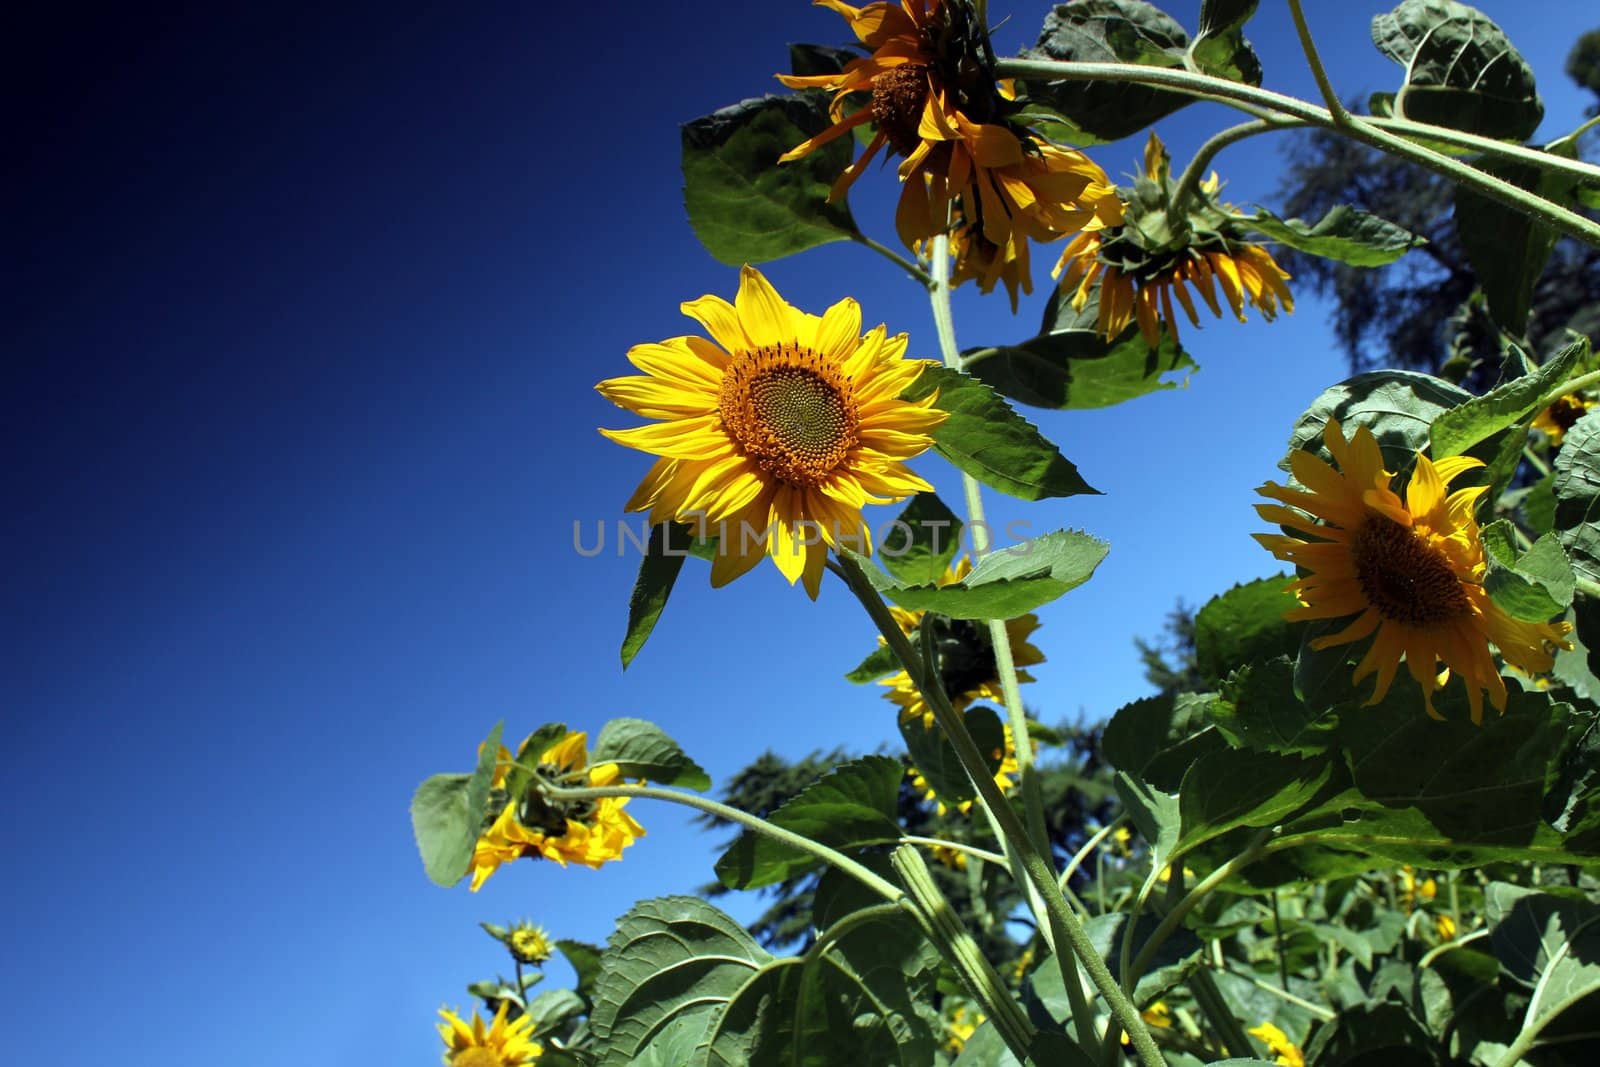 sunflowers and blue summer sky